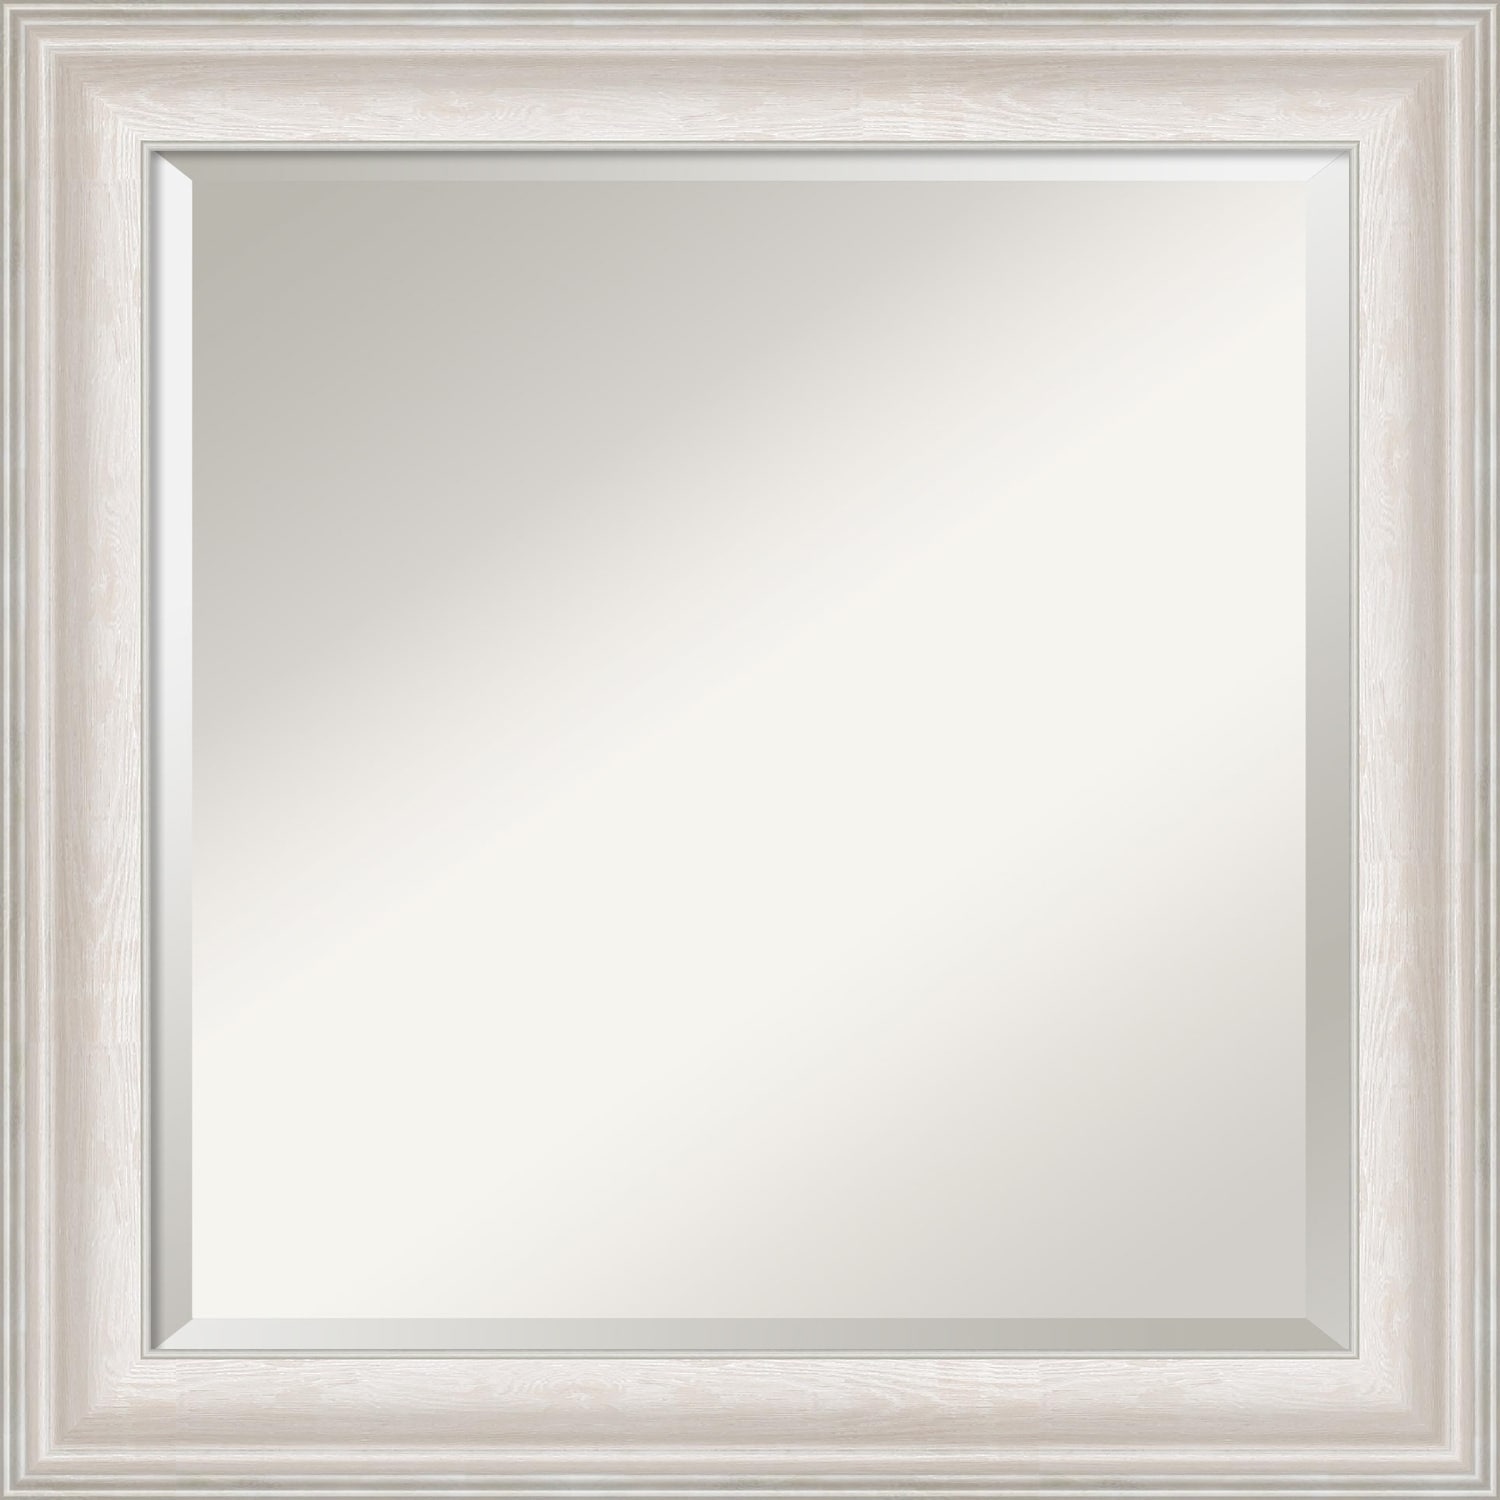 Sausalito Ribbed 4 x 6 Picture Frame, White